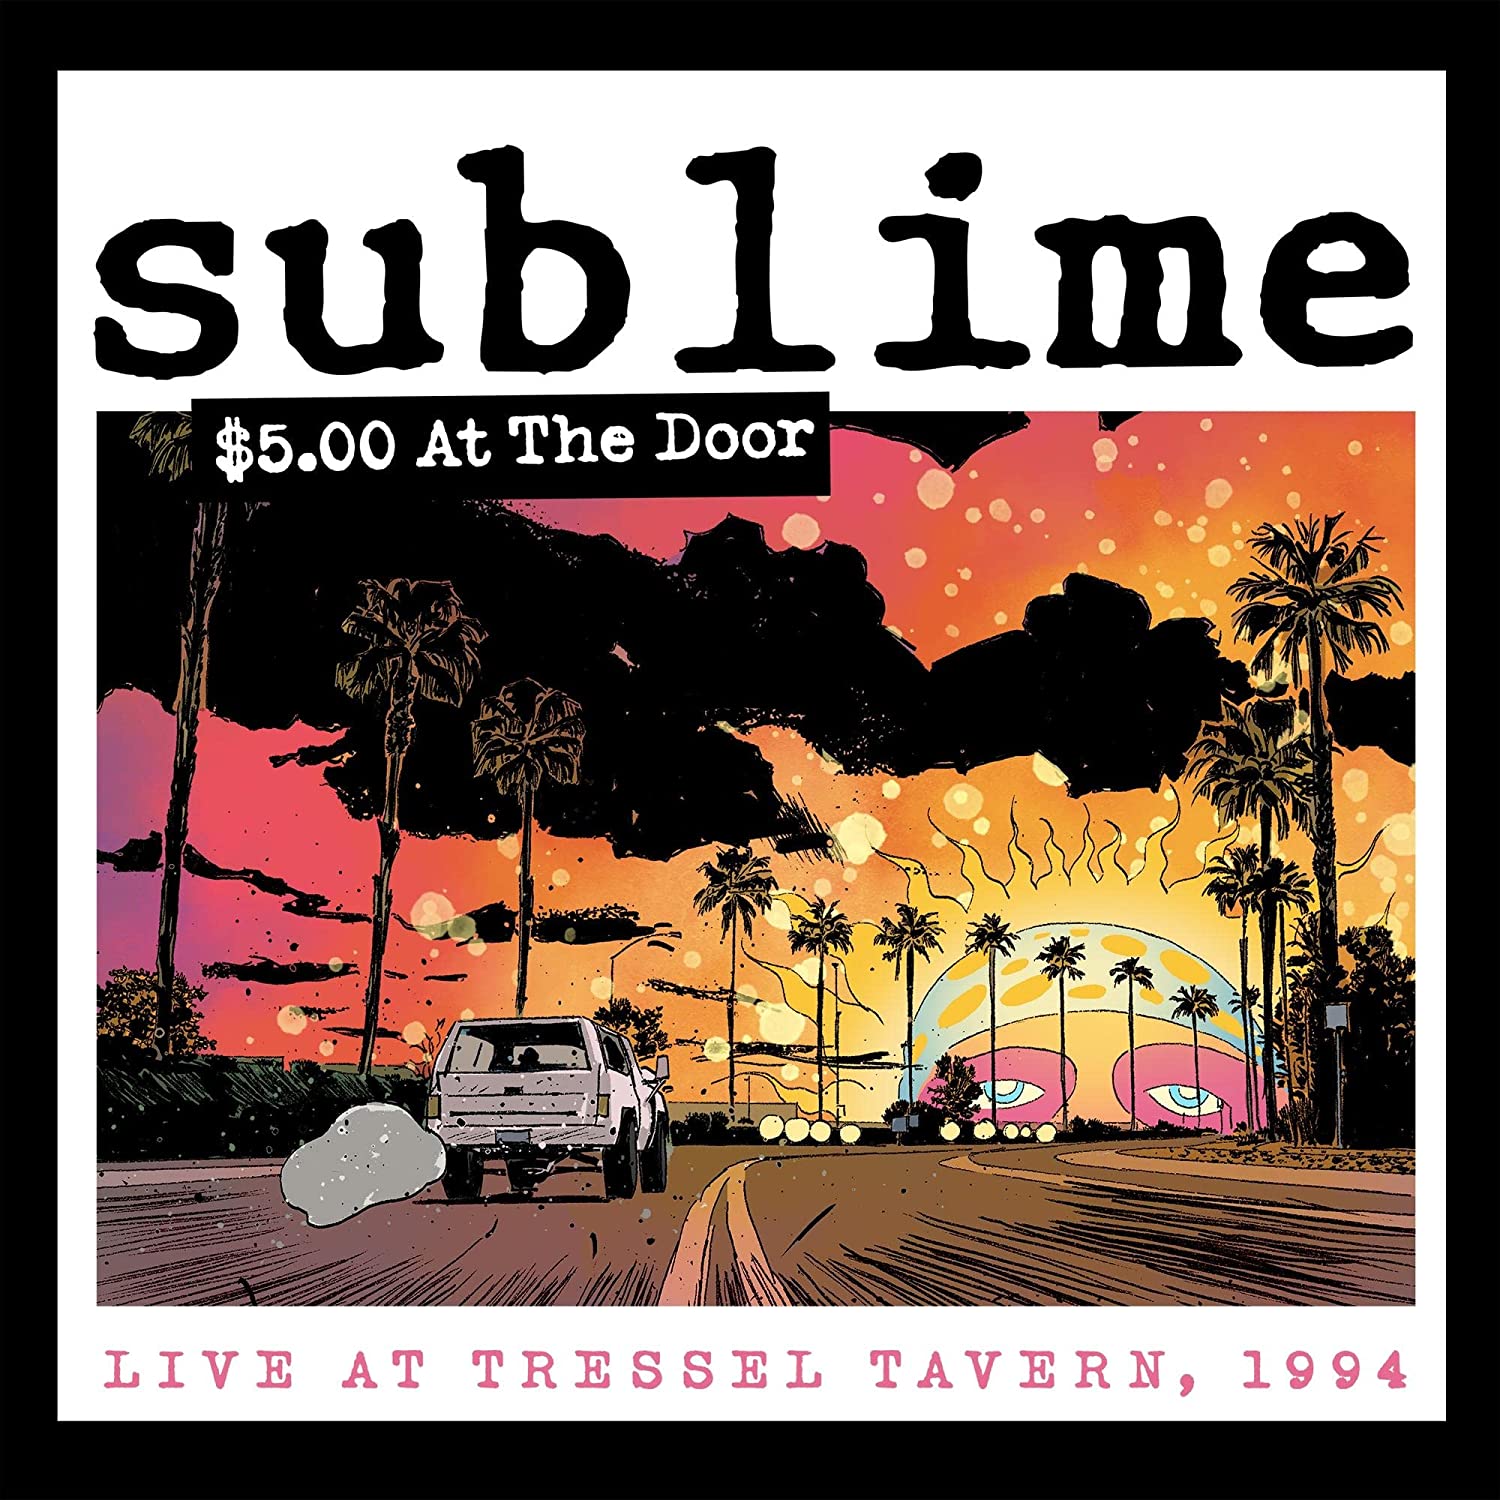 Sublime $5 At The Door